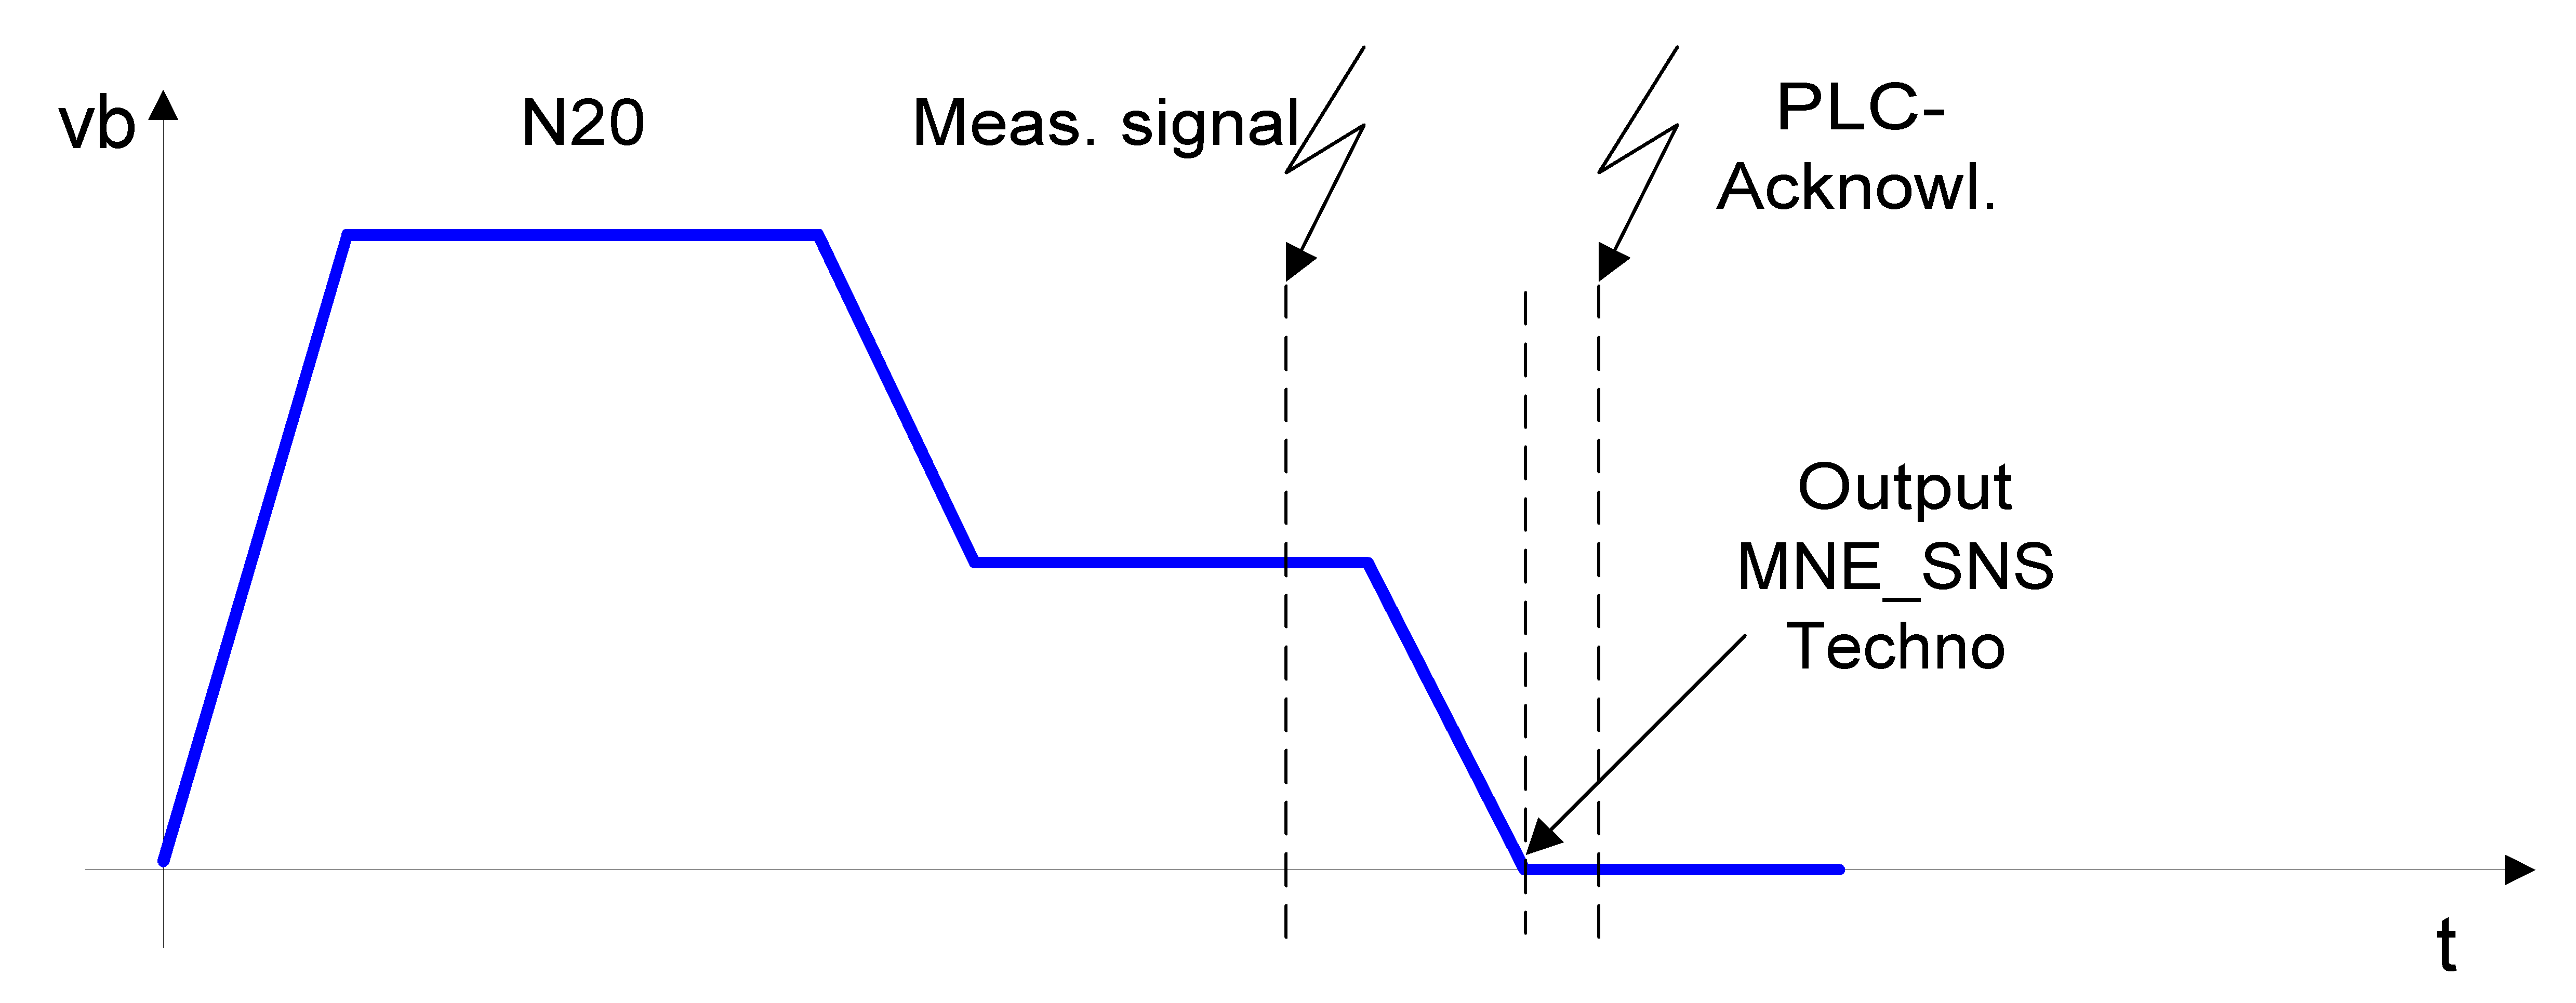 Output M function after measuring signal and remove residual path (P-CHAN-00435 = 0)